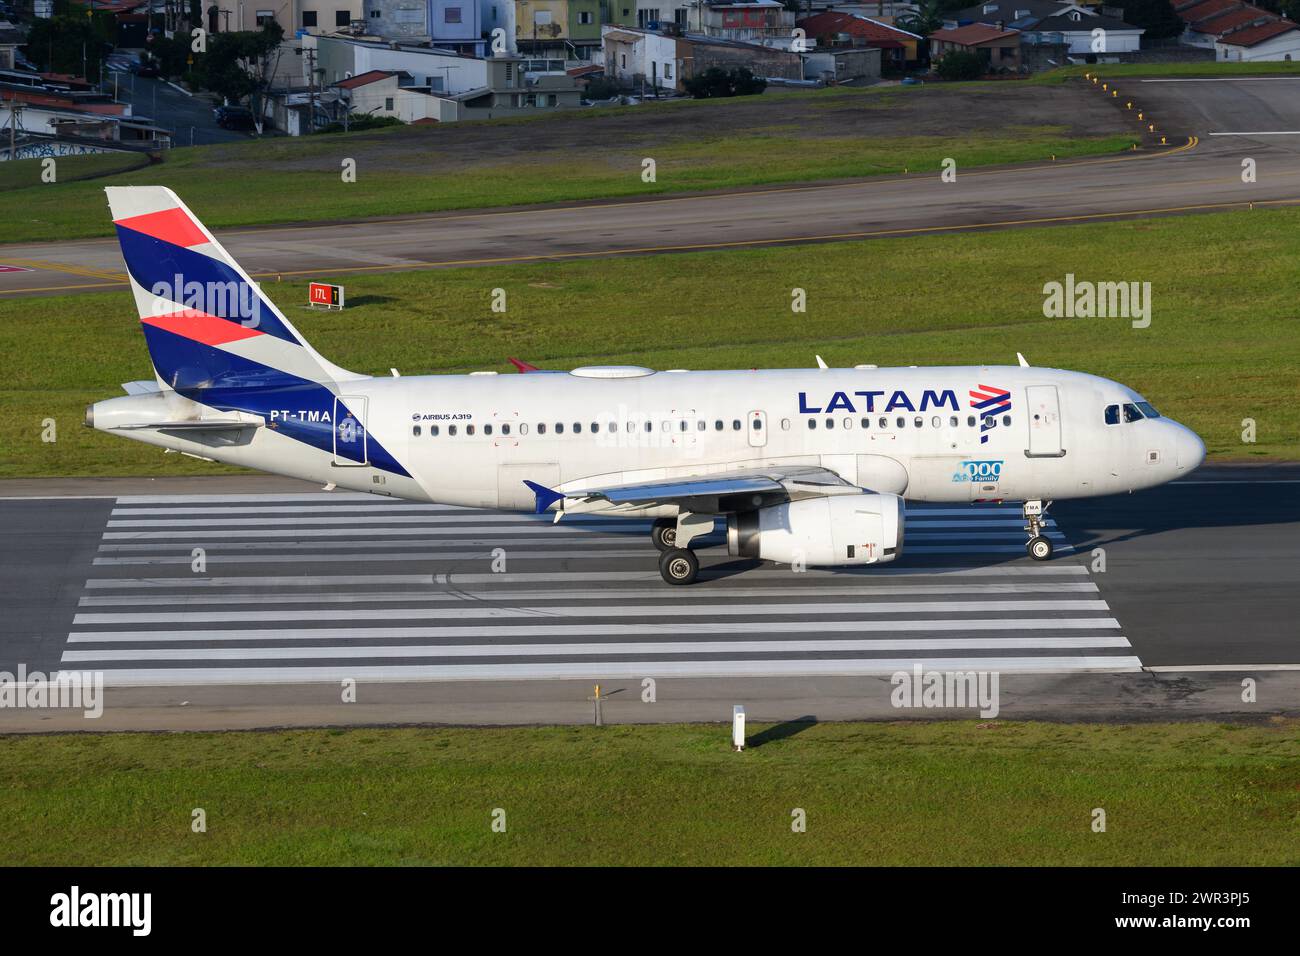 LATAM Airlines Airbus A319 airplane. Aircraft of LATAM Airlines Brazil of model A320. Plane above runway threshold. Stock Photo